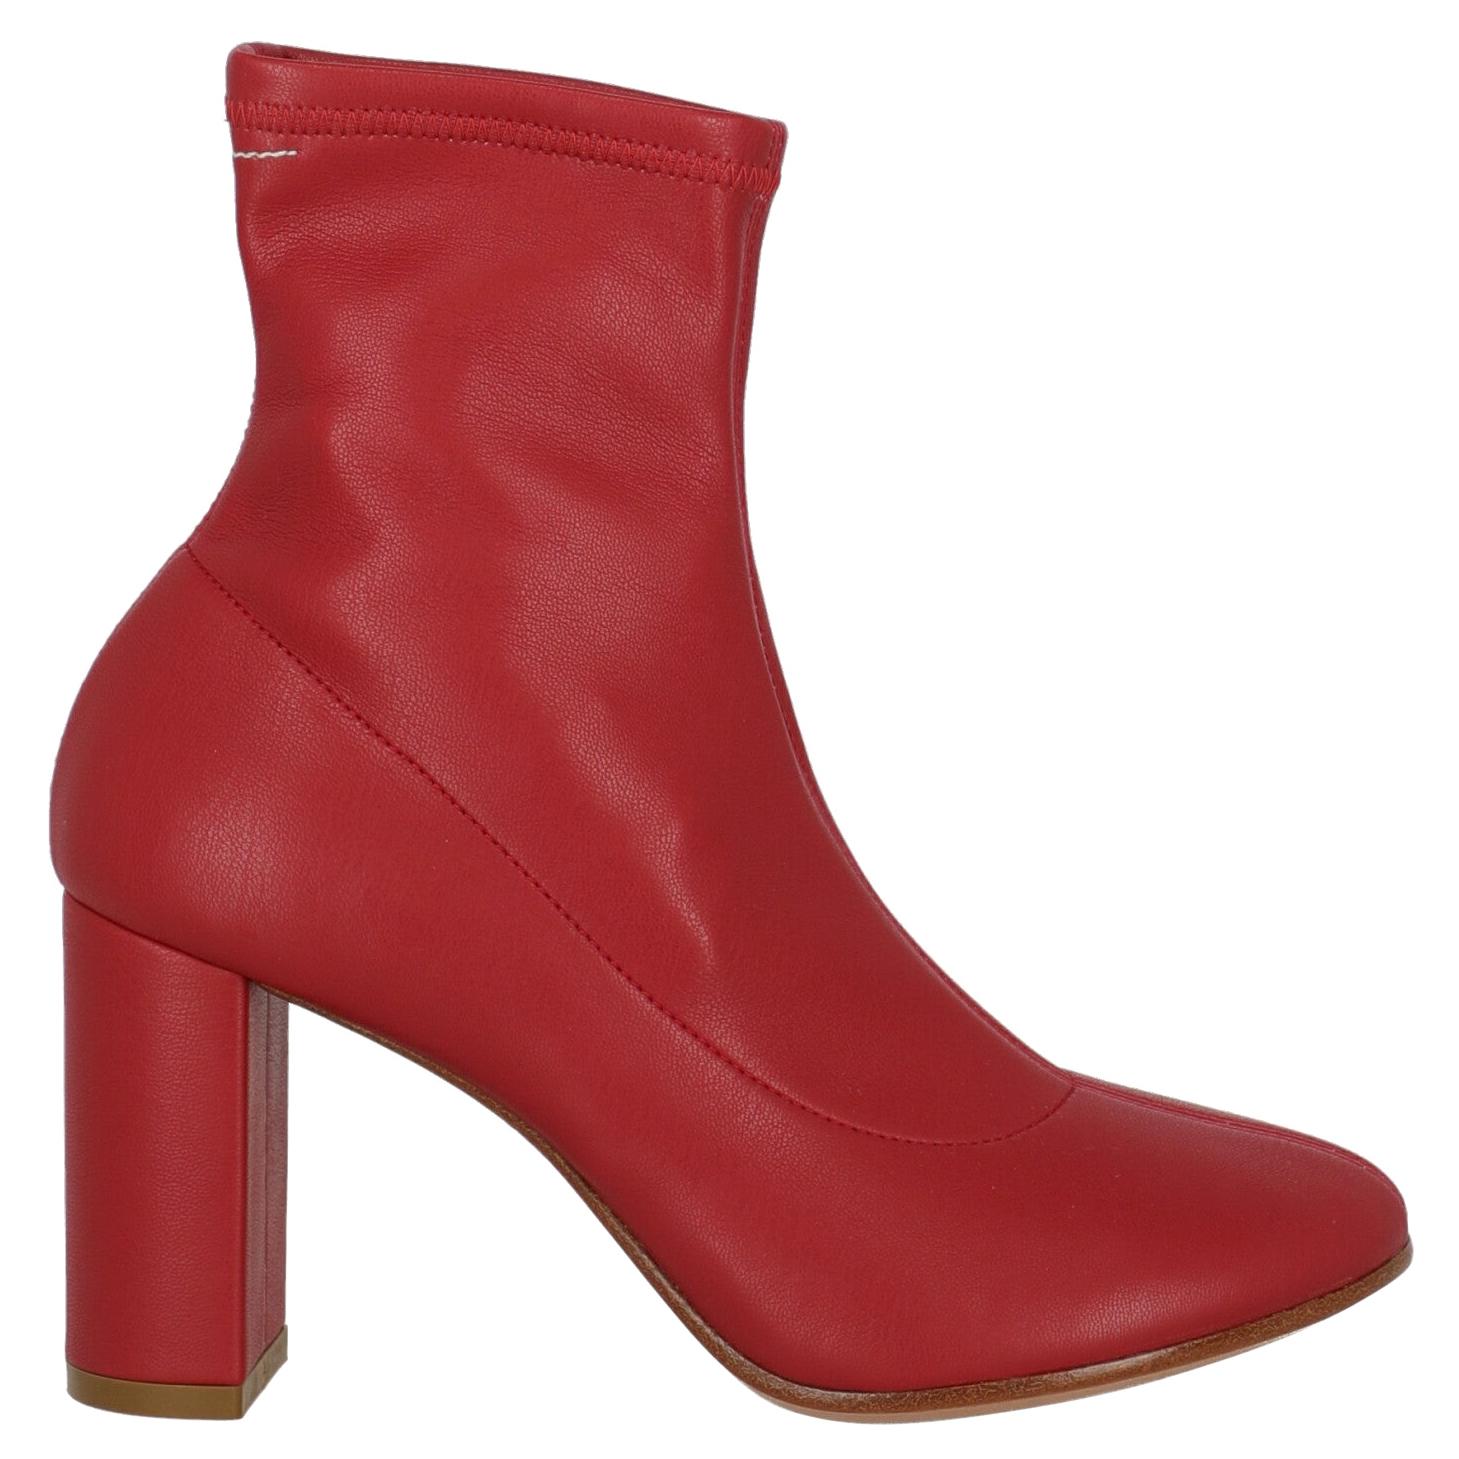 Mm6 Maison Margiela  Women   Ankle boots  Red Leather EU 38 For Sale